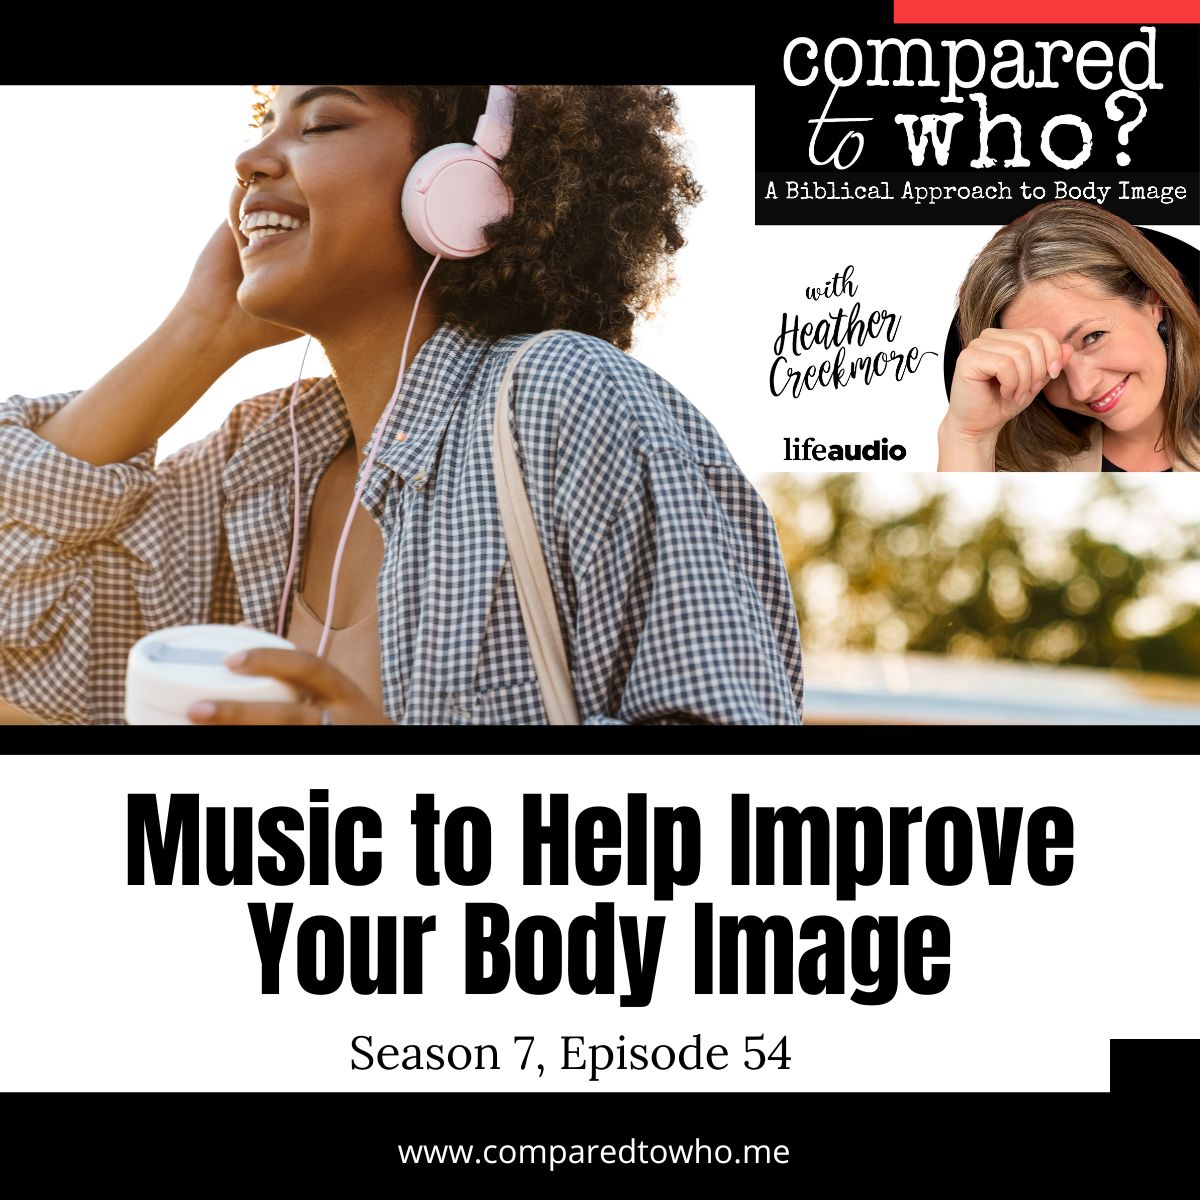 Christian Music to Help Improve Your Body Image